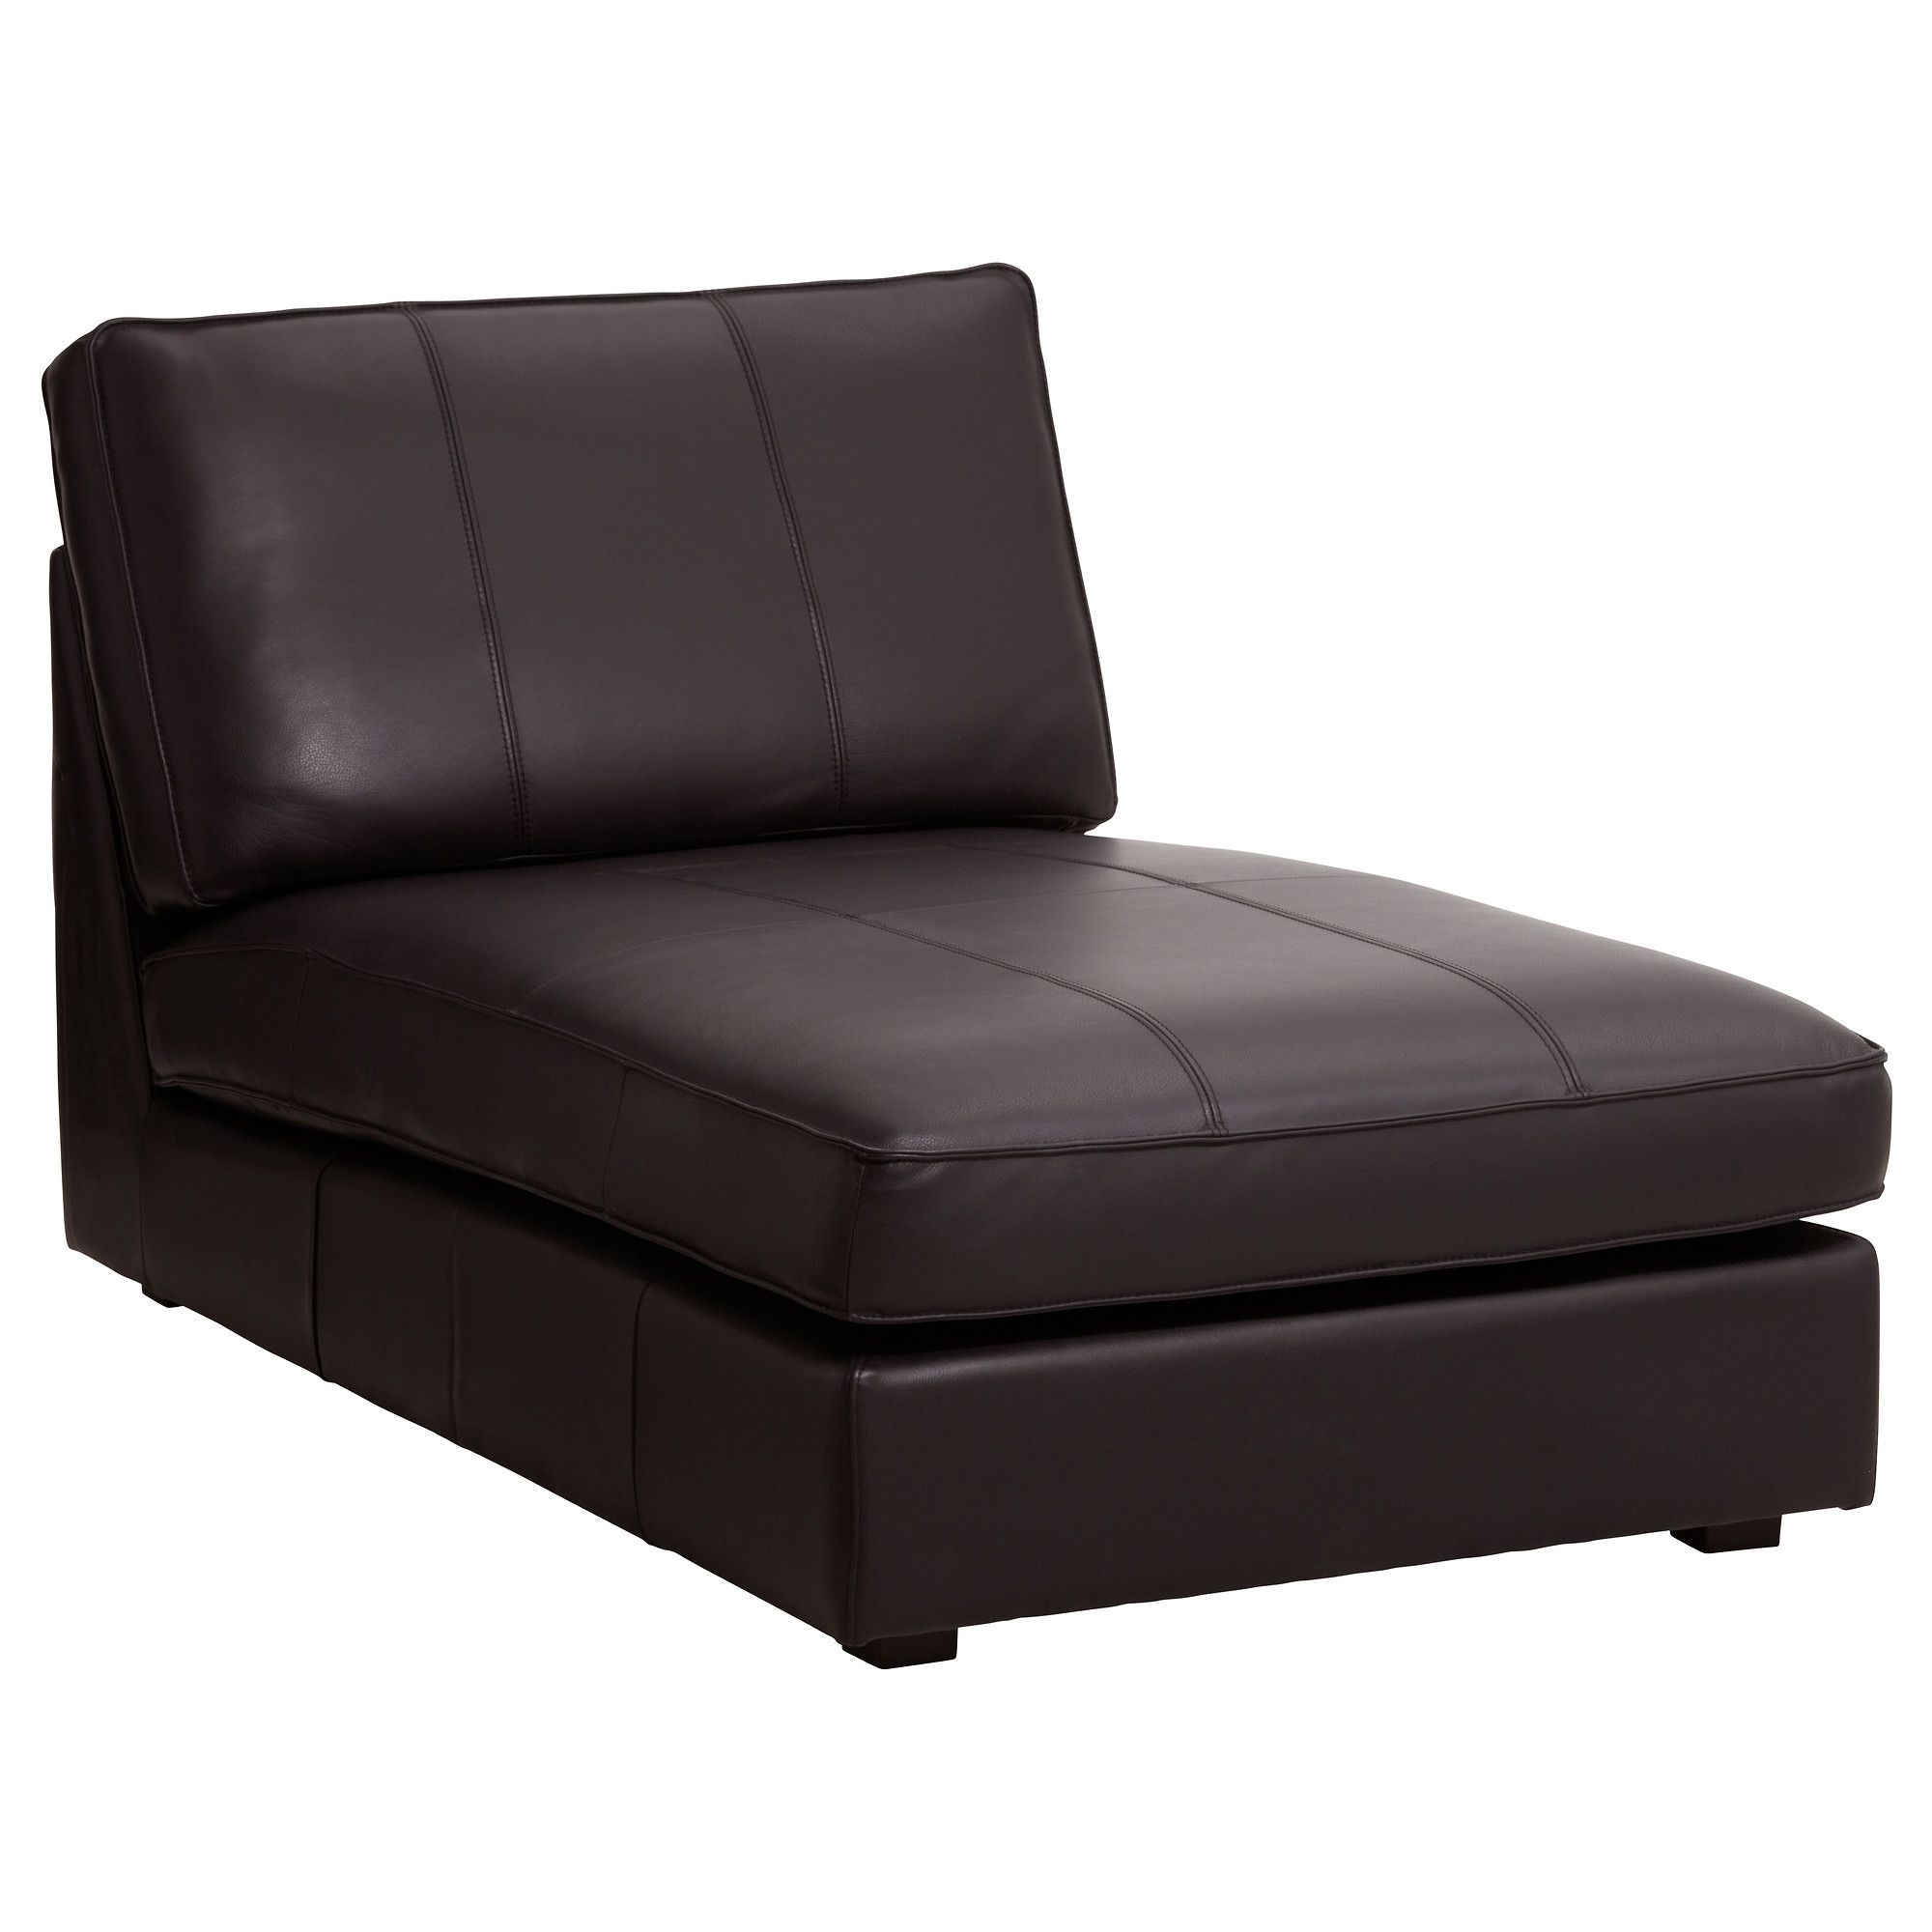 Kivik Chaise Longue – Grann/bomstad Black – Ikea Within Well Known Ikea Chaise Longues (View 3 of 15)